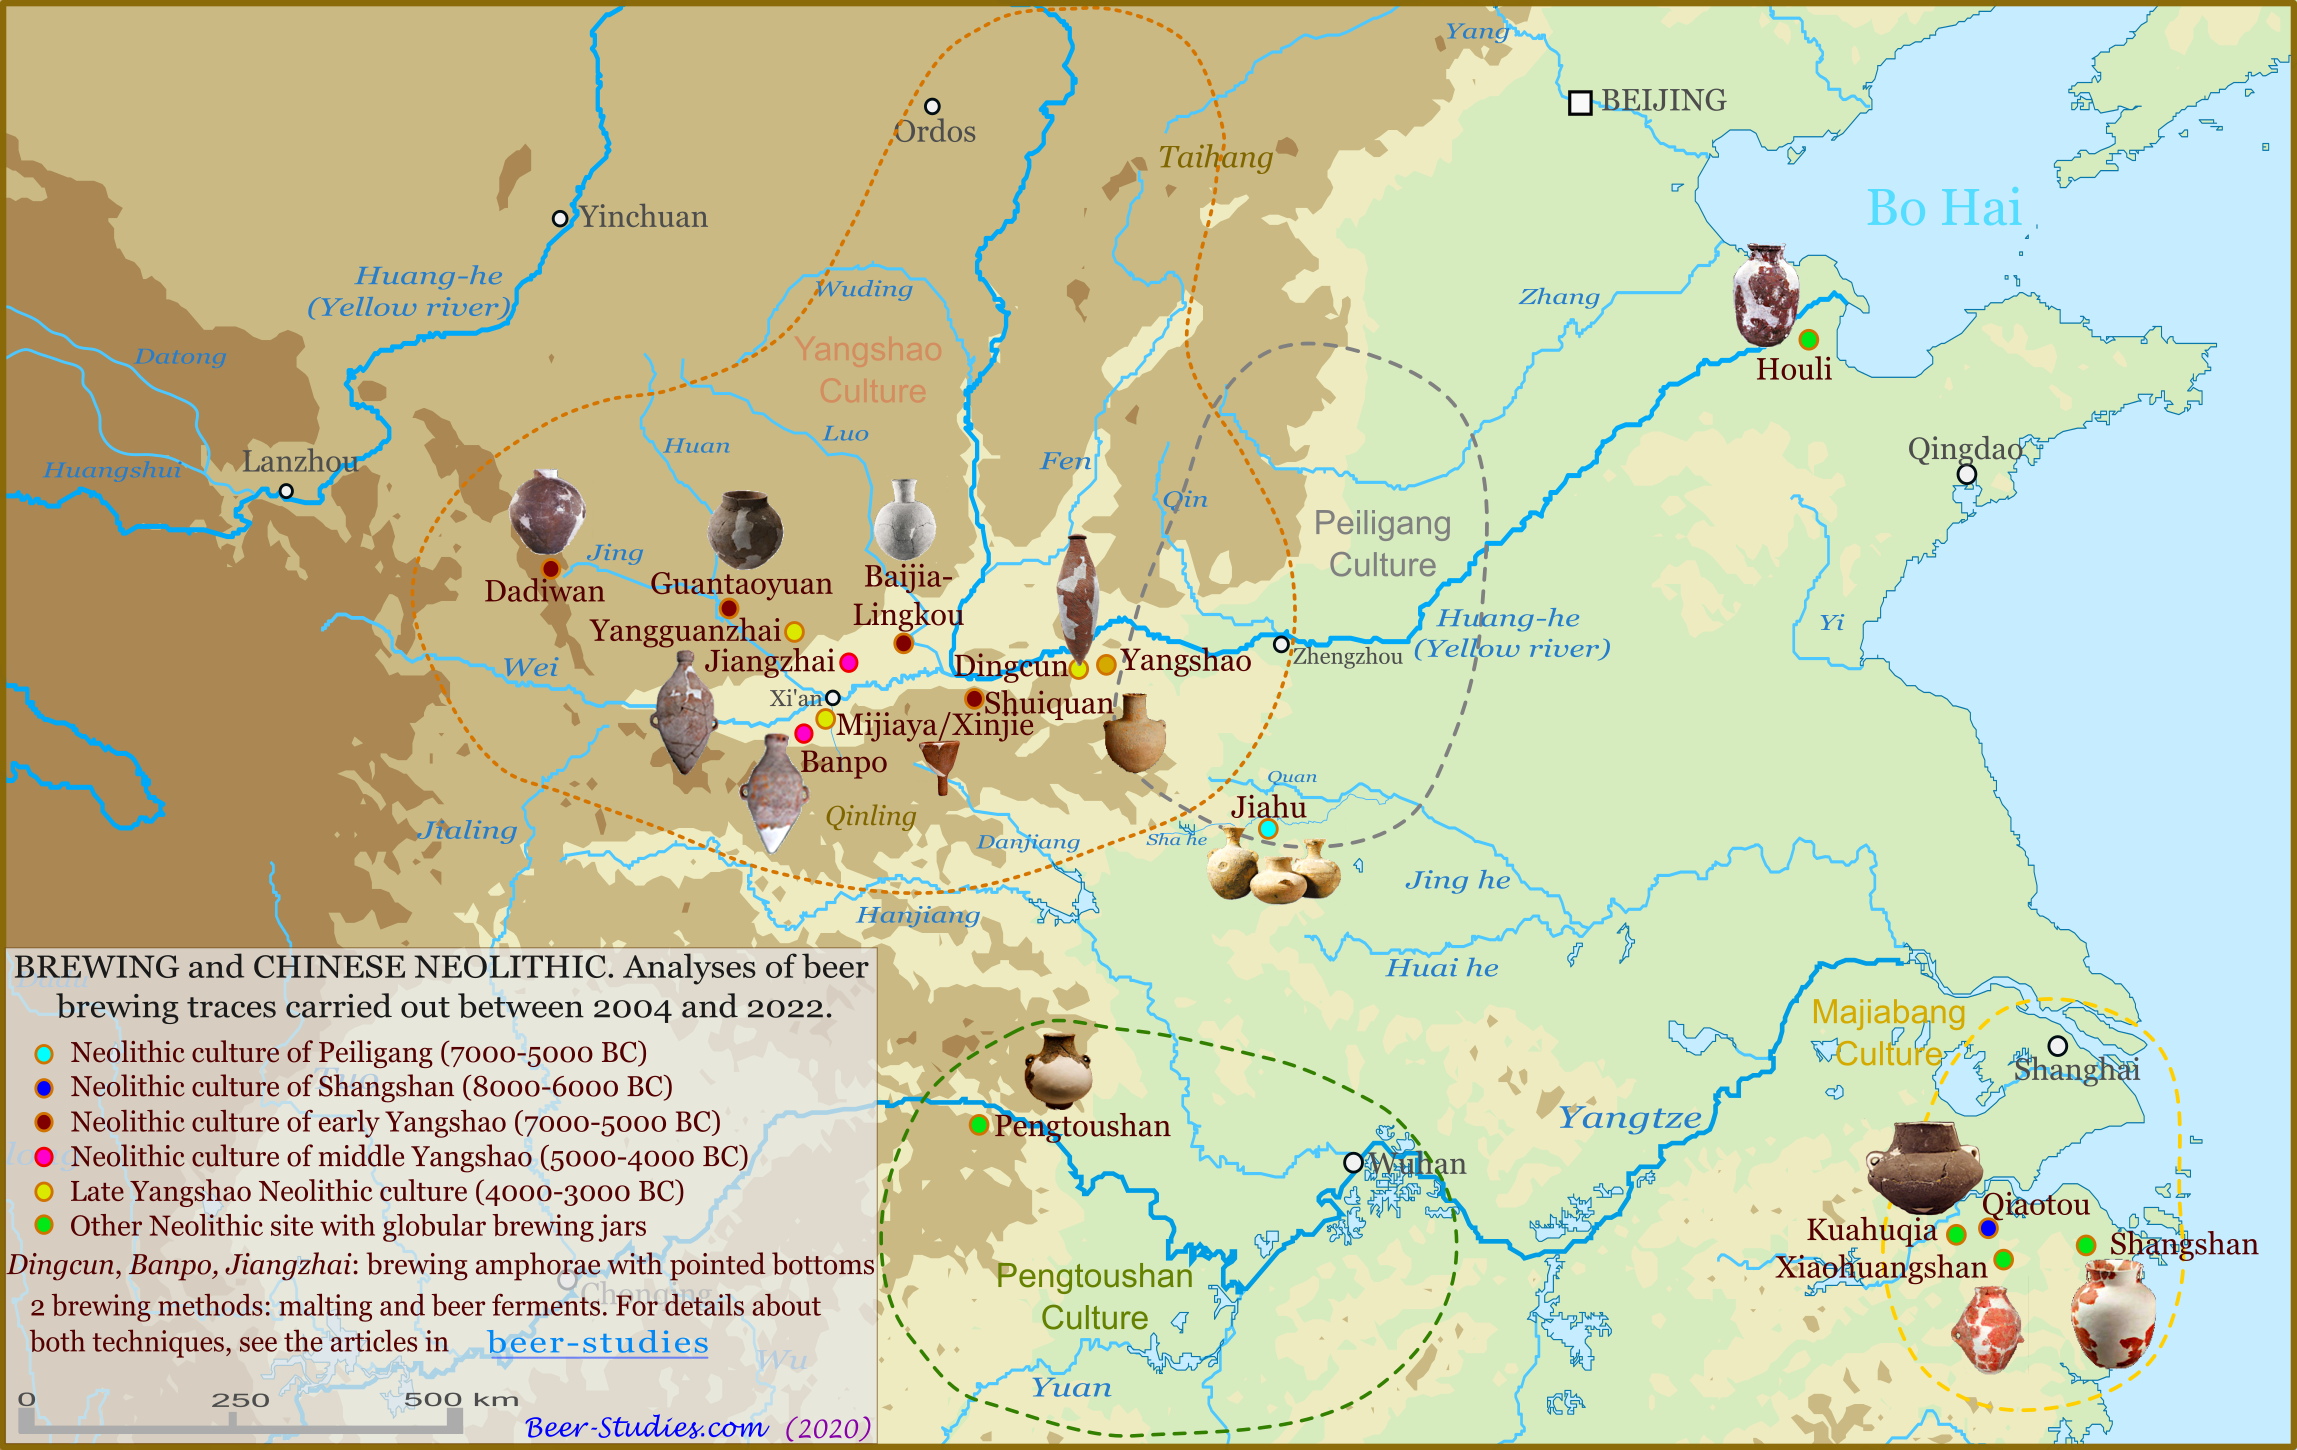 Location of Neolithic sites related to beer brewing in China.